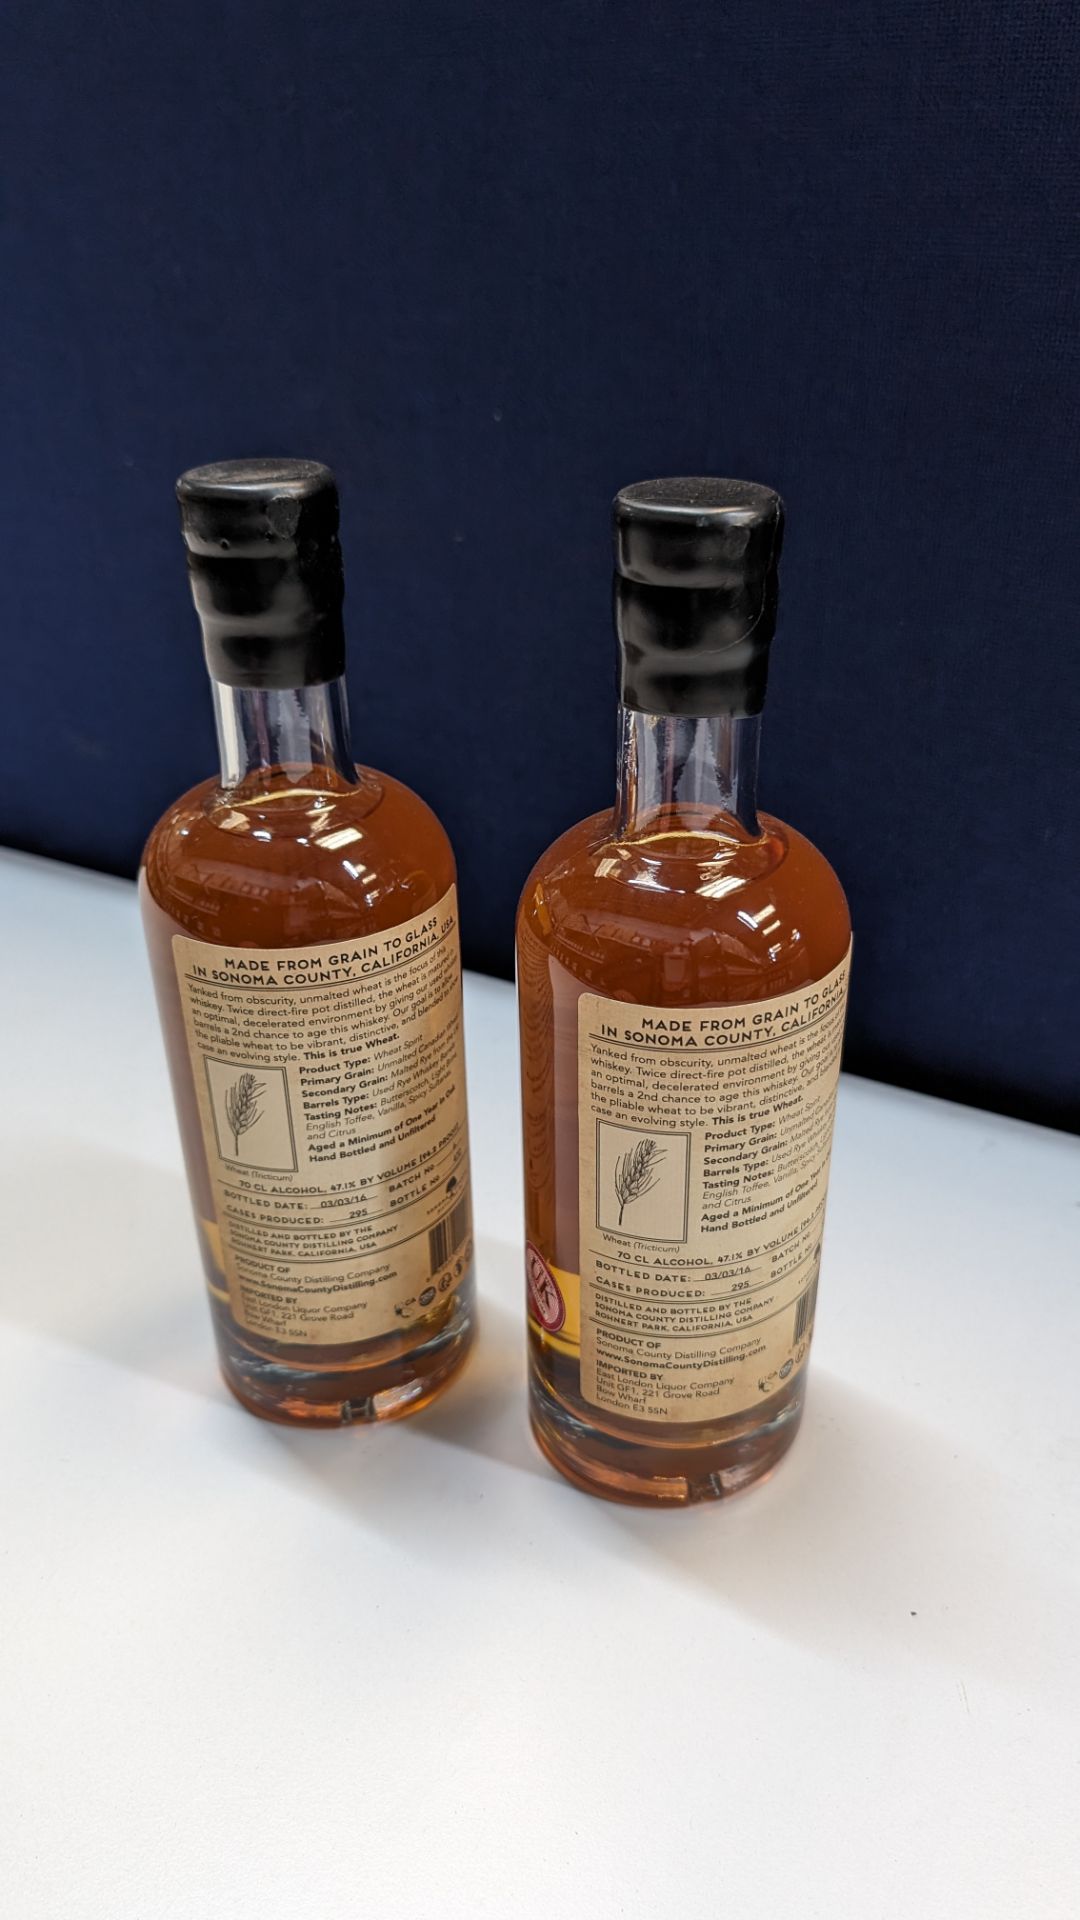 2 off 700ml bottles of Sonoma County 2nd Chance Wheat Double Alembic Pot Distilled Whiskey. 47.1% a - Image 4 of 7